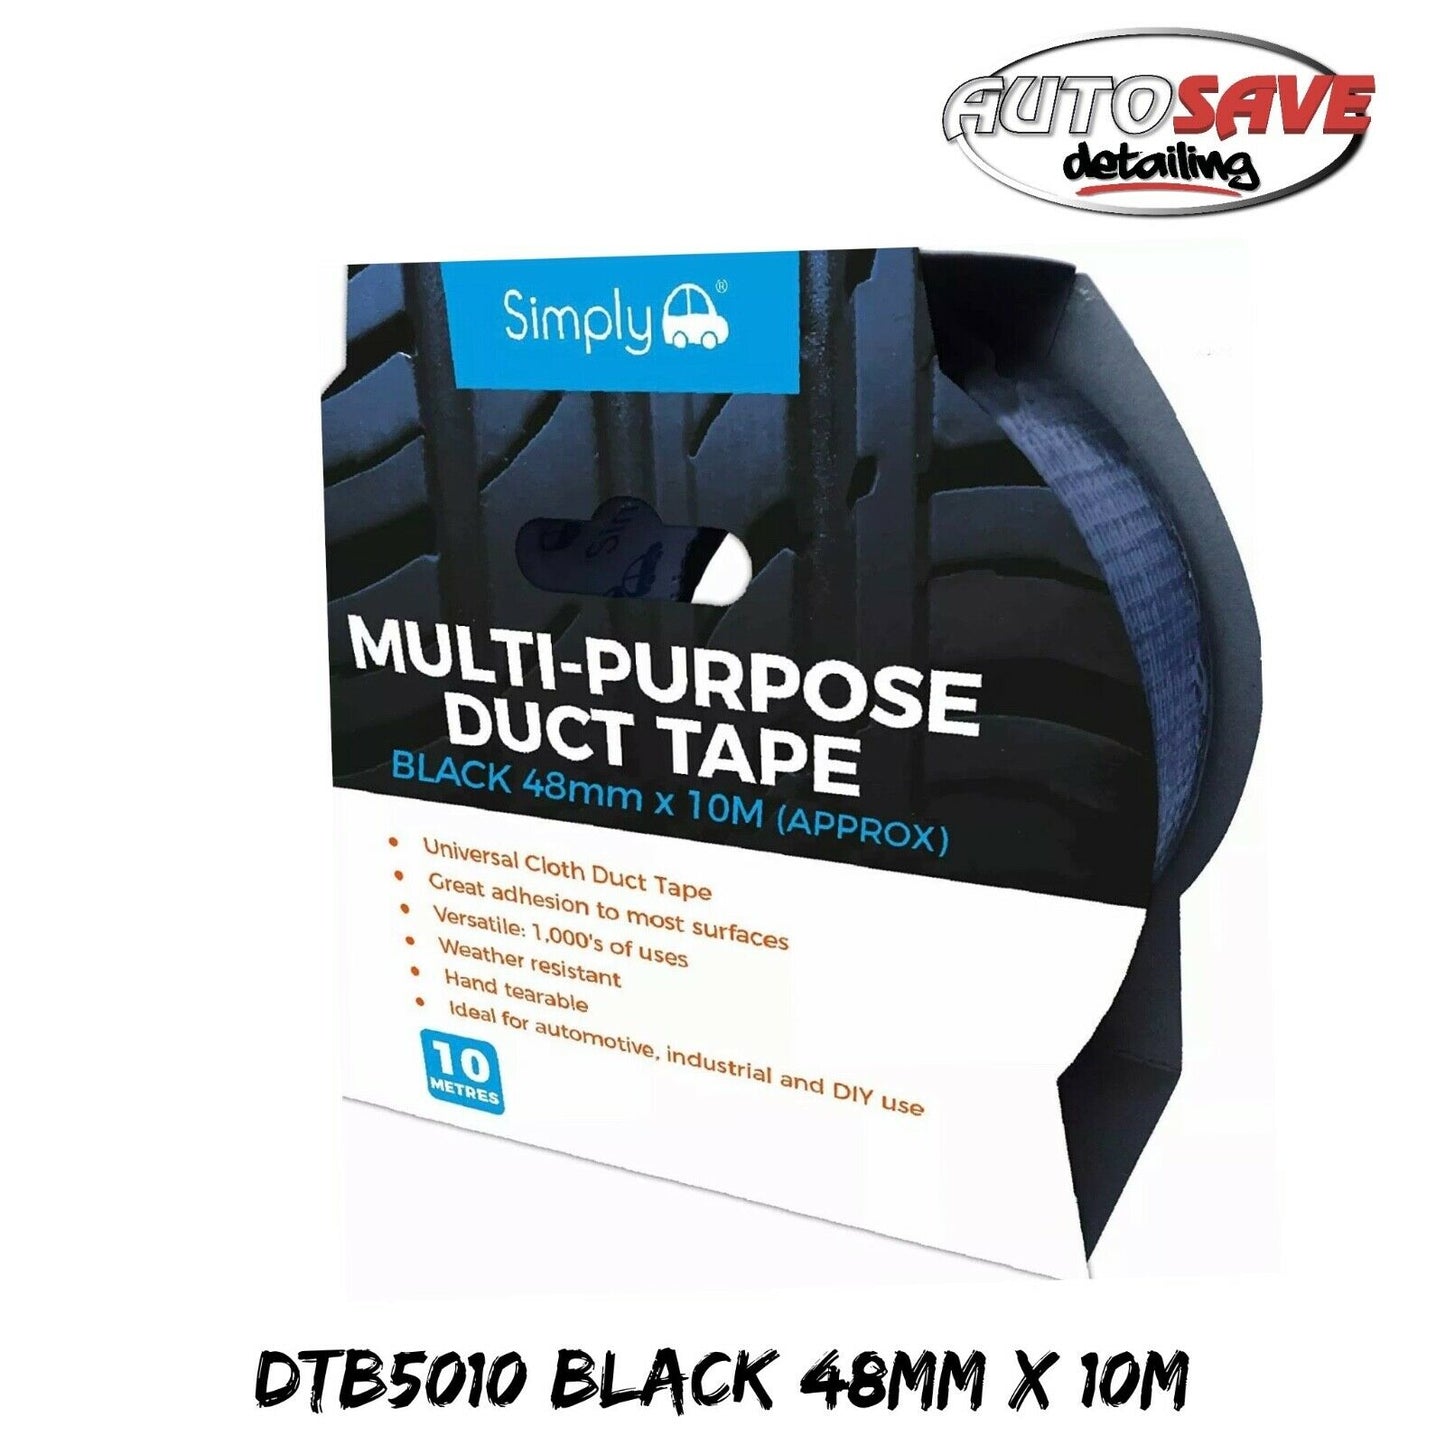 Cloth Duct Tape Black Multi-Purpose Adhesive Weather Resistant 48mm x 10m Roll